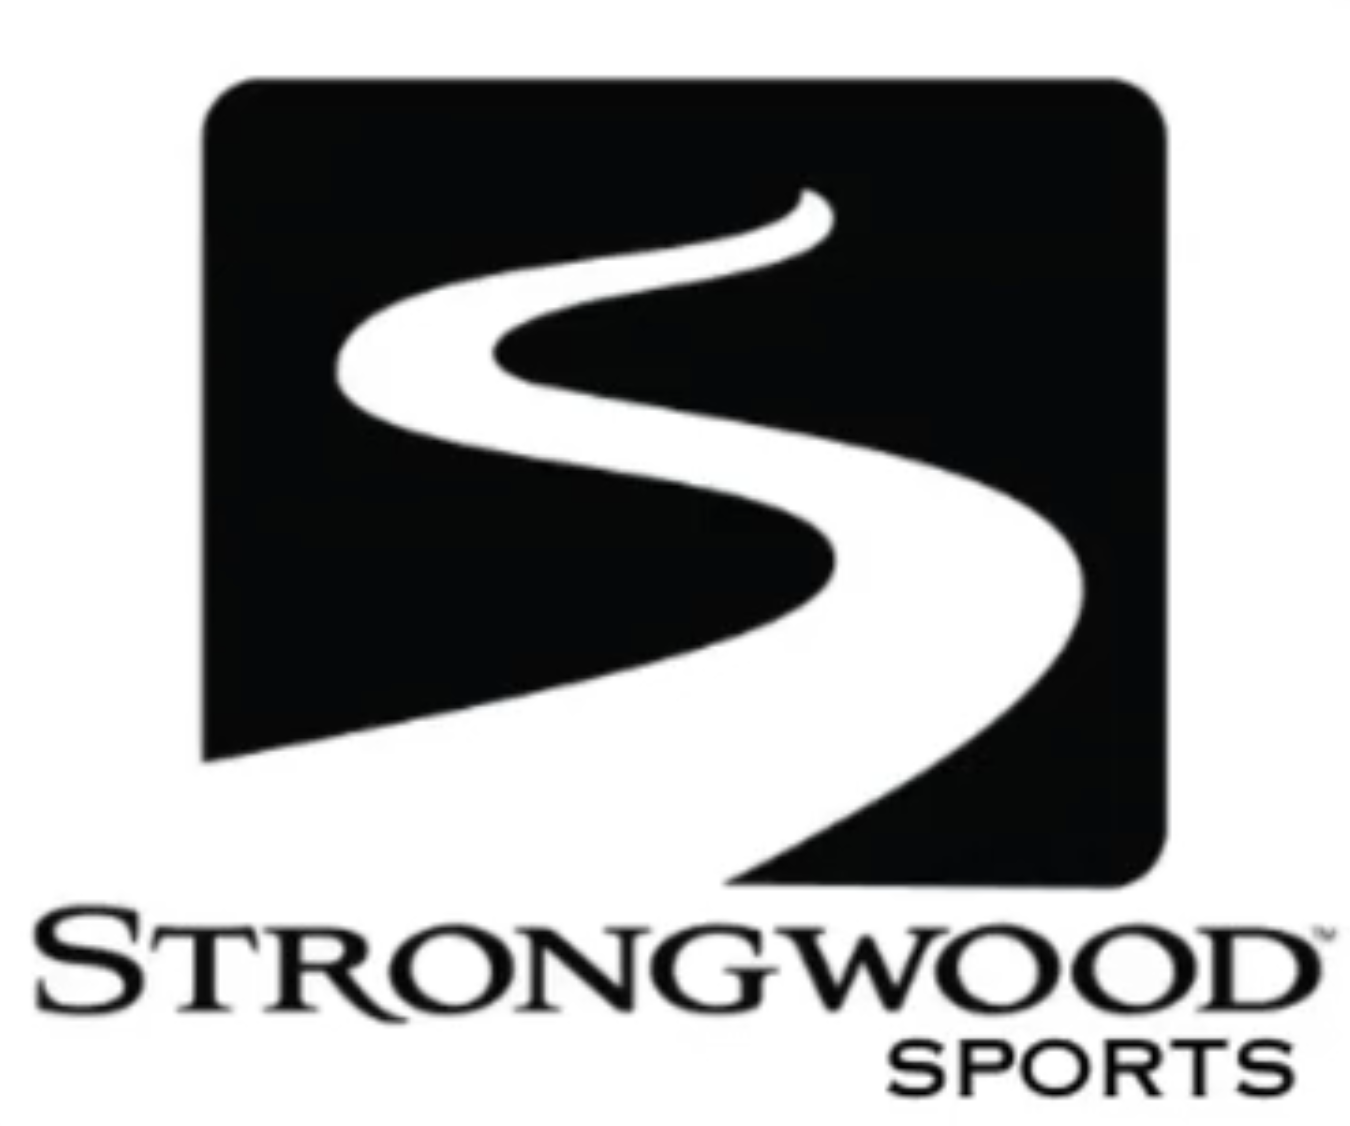 StrongWood Sports